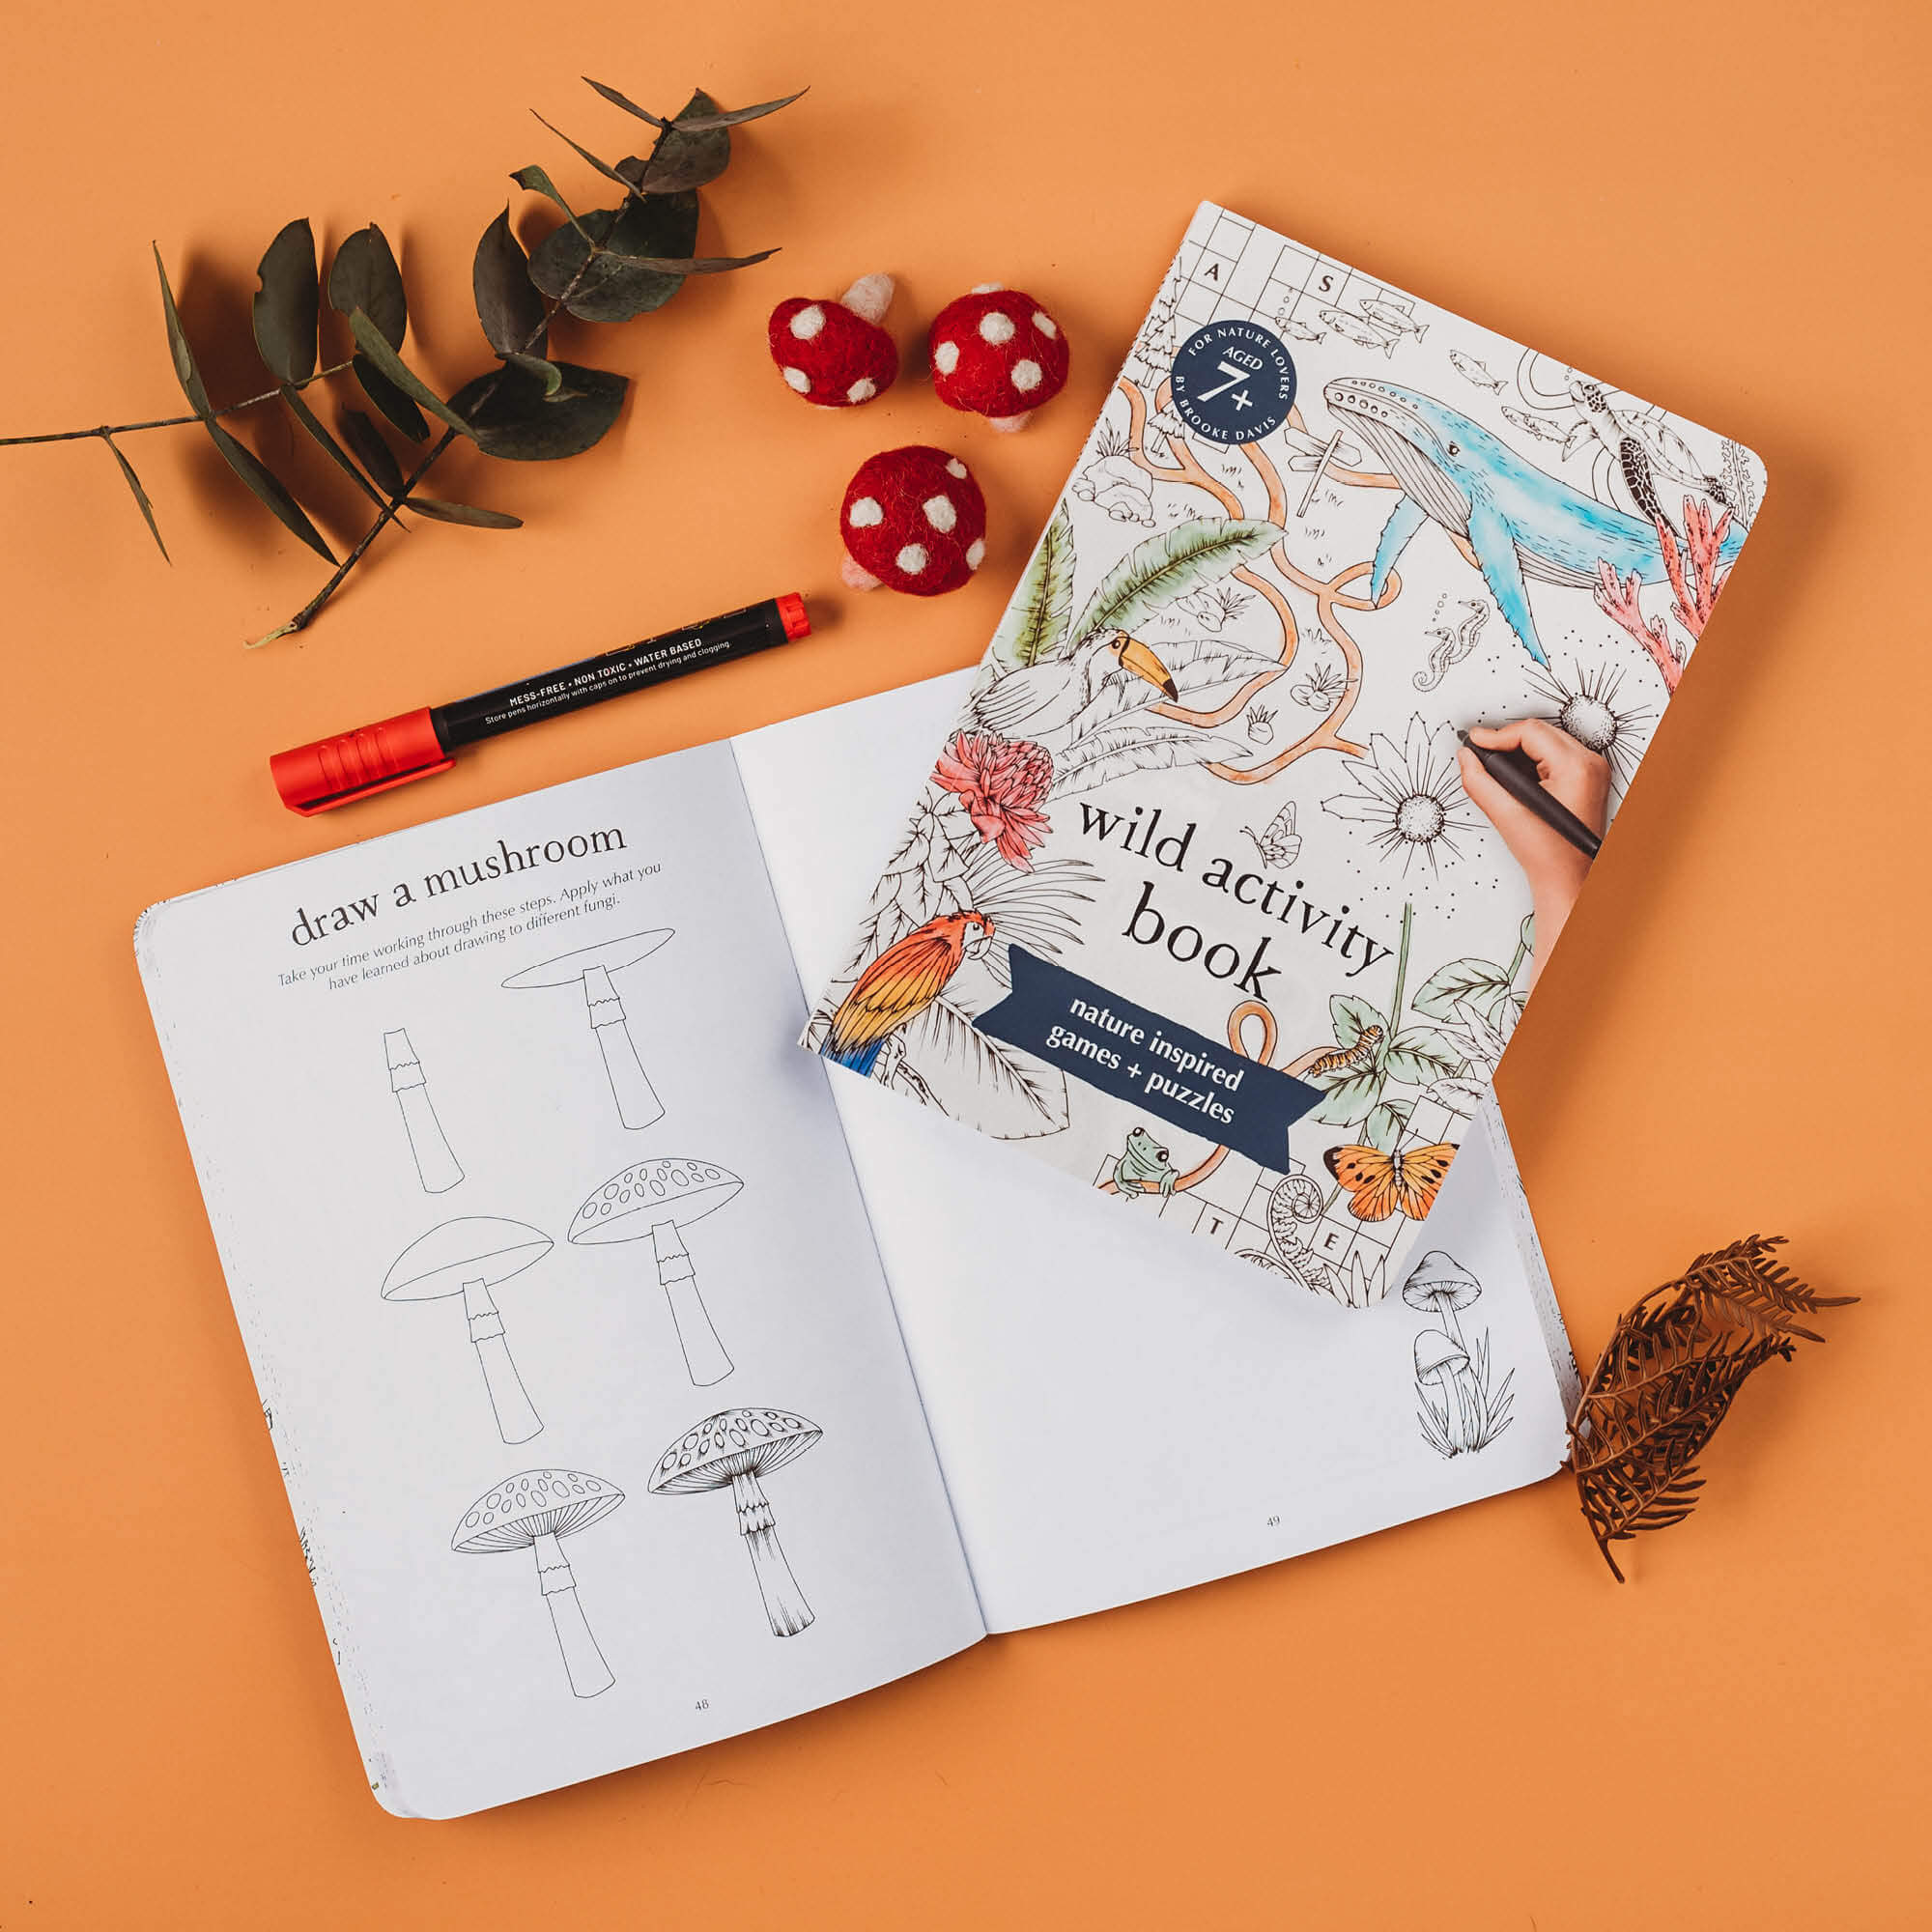 Step-by-step drawing activity from Wild Activity Book, nature inspired games and puzzles by Your Wild Books. Made in Australia for kids over 7 years.